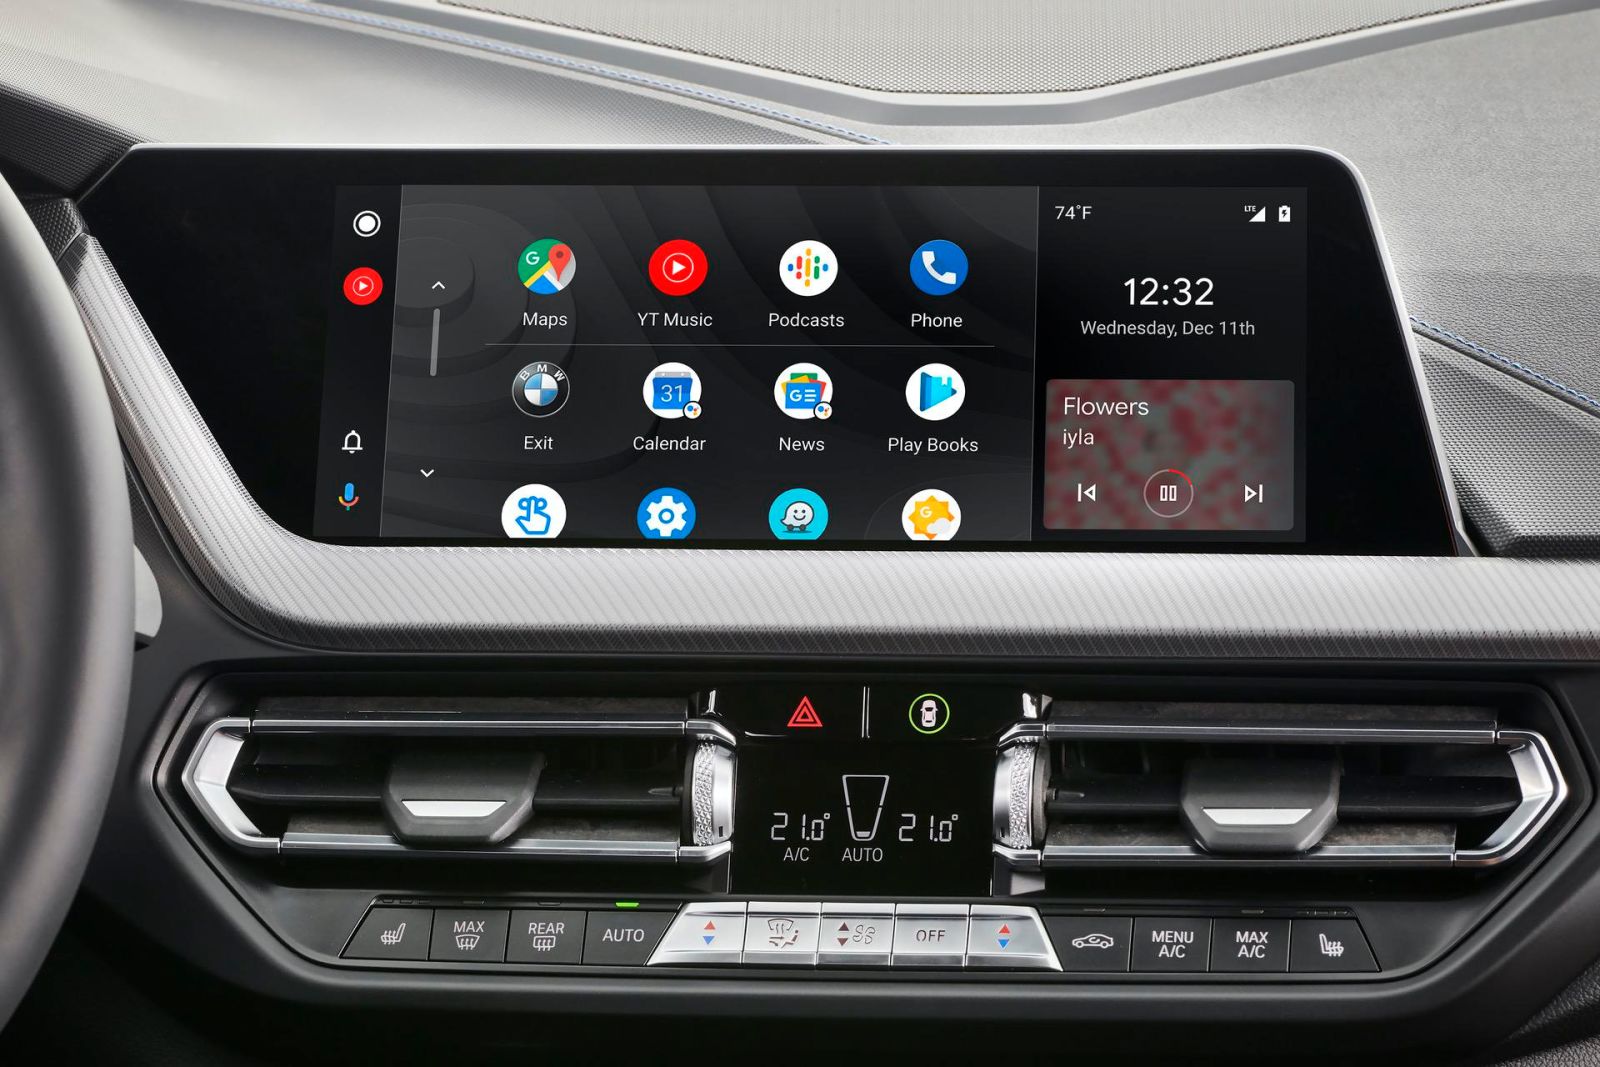 Illustration for article titled Now theres one less thing in the world for me to complain about: BMW is finally jumping on the Android Auto bandwagon (UPDATE: except they still kinda fucked it up)